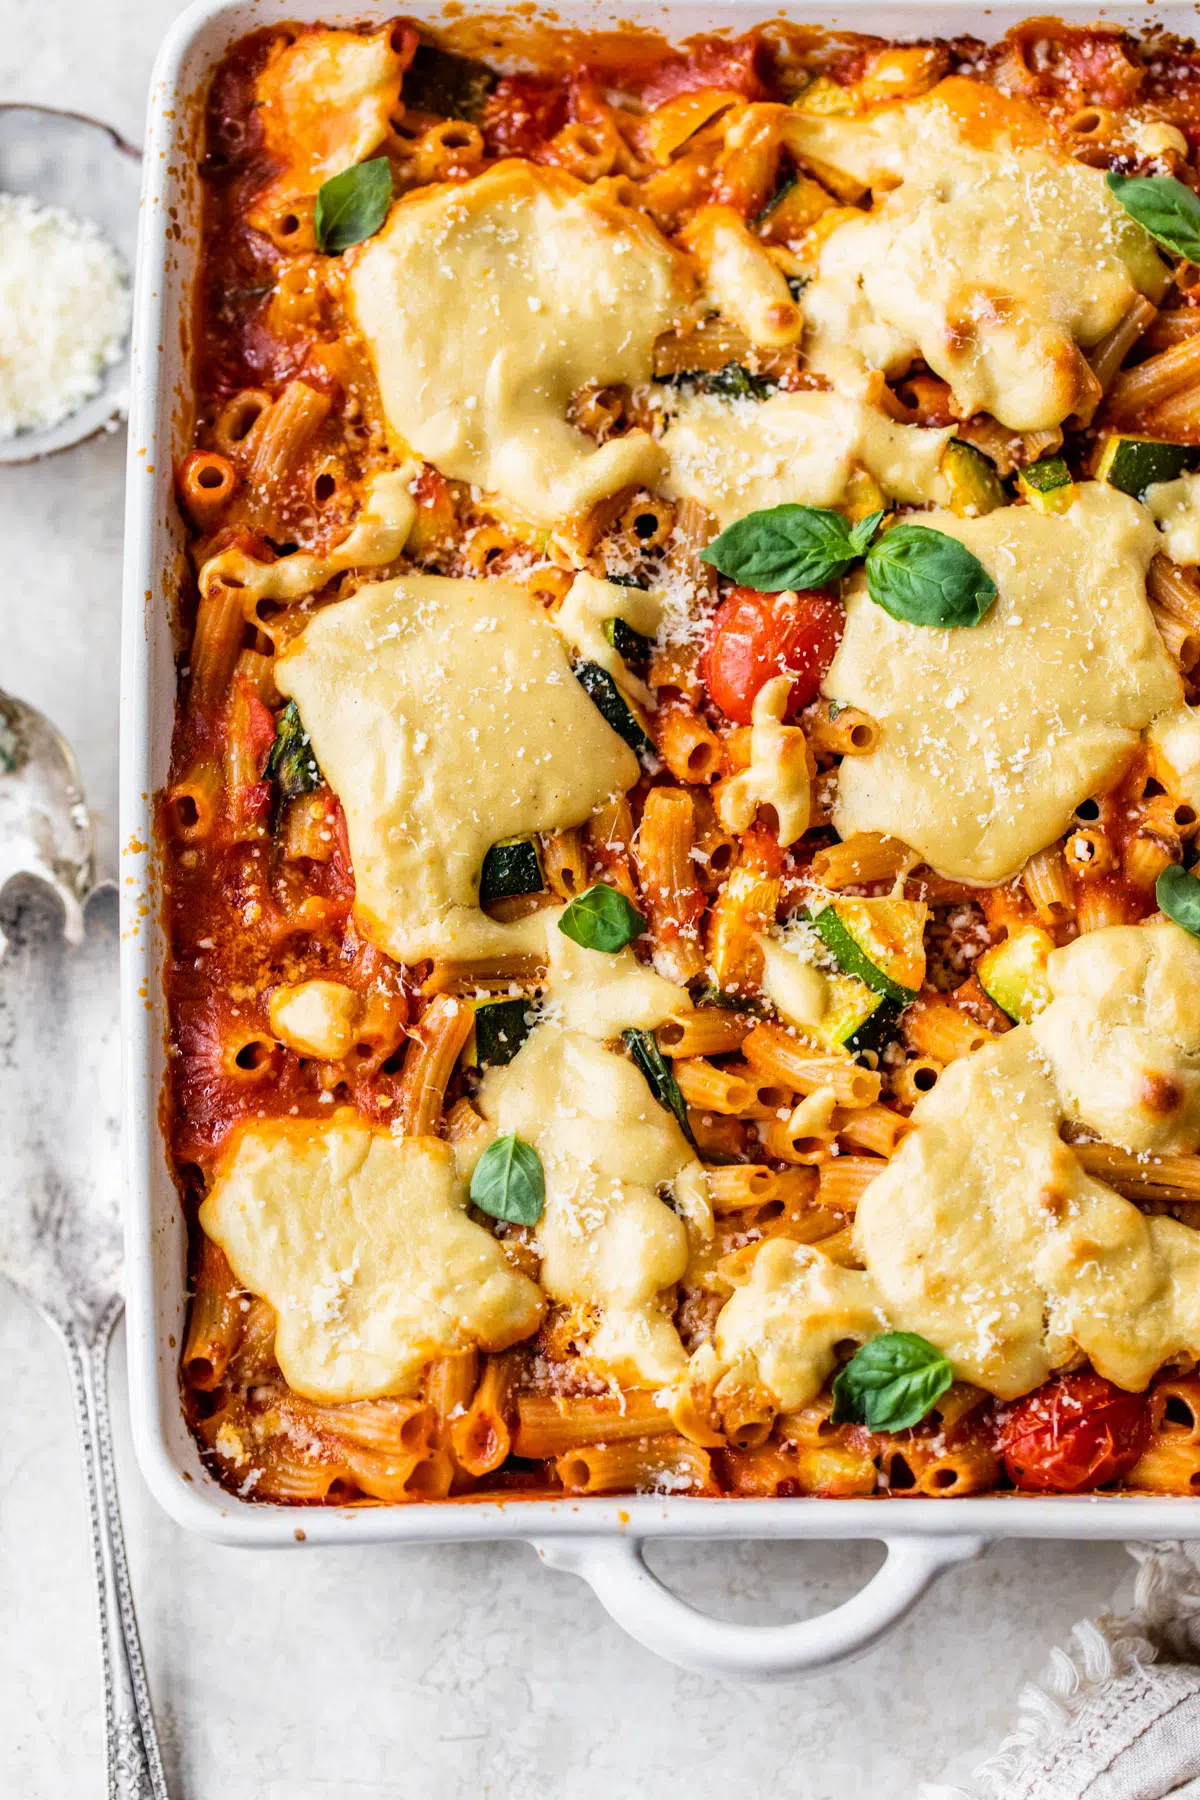 casserole dish filled with pasta, marinara sauce and cheese